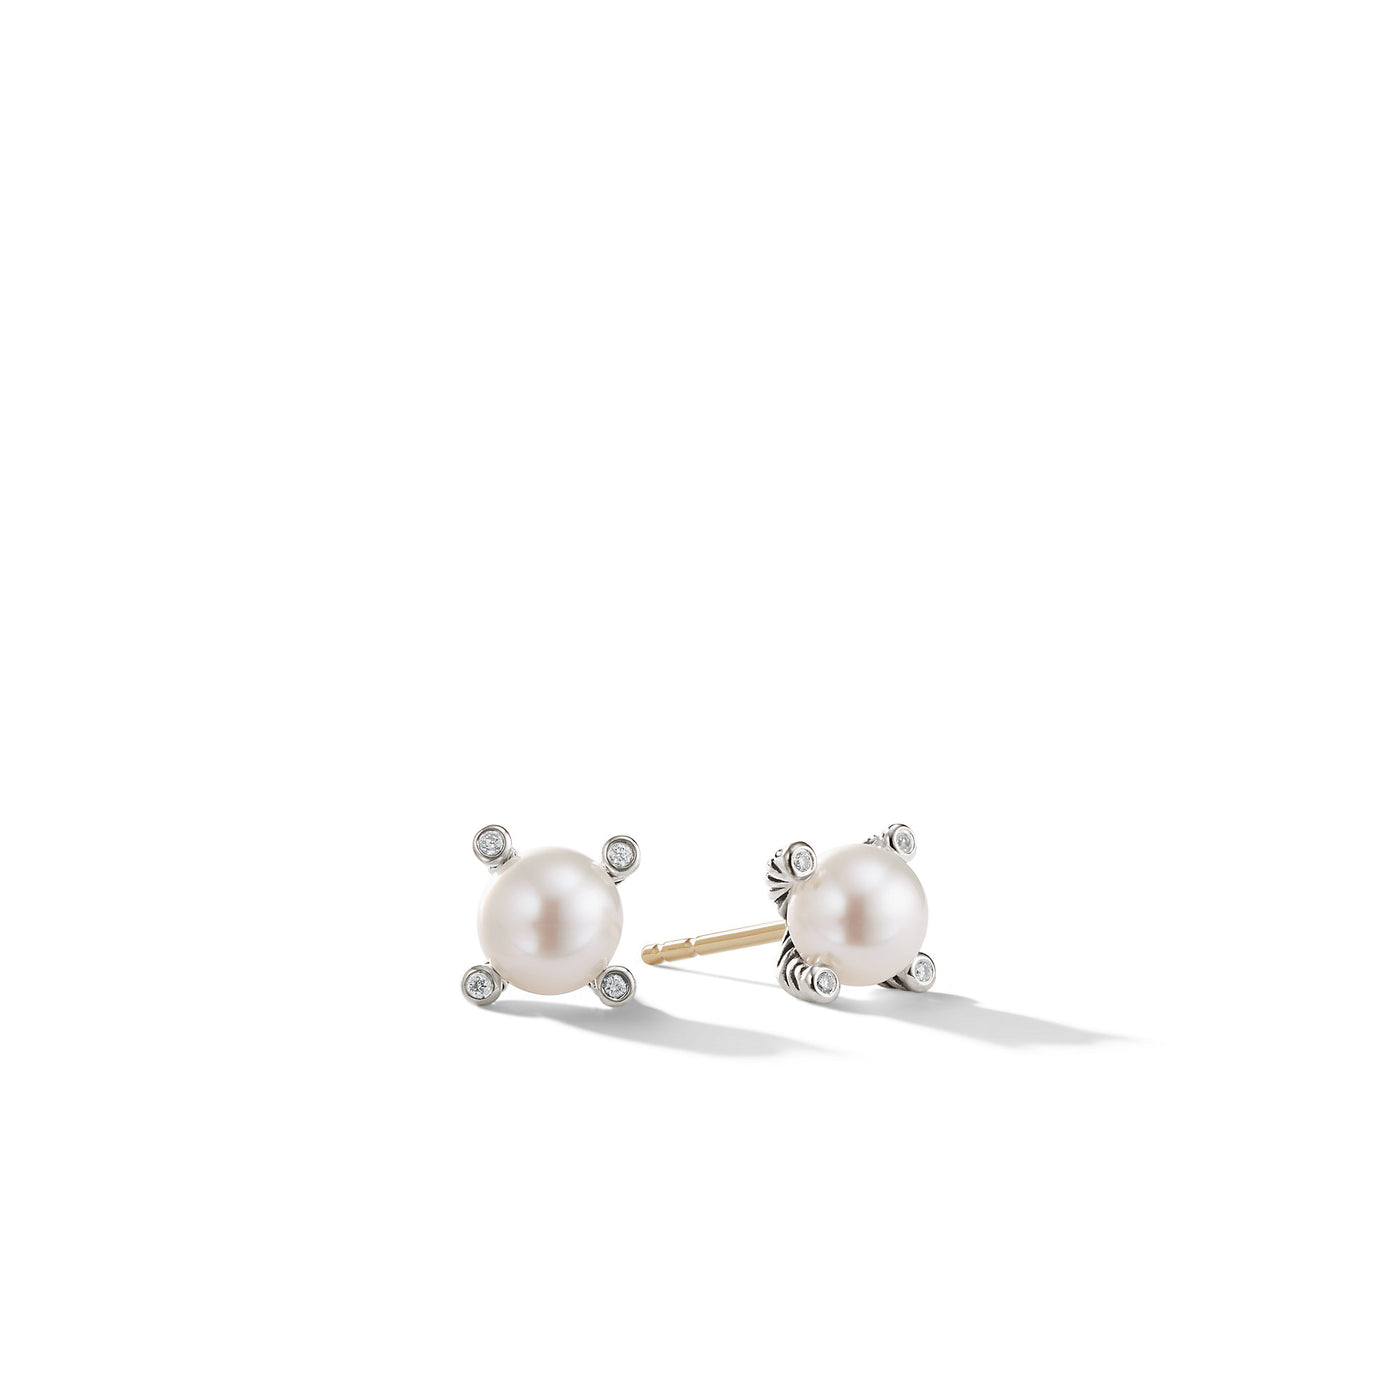 Pearl Stud Earrings in Sterling Silver with Pearls and Diamonds\, 7.4mm